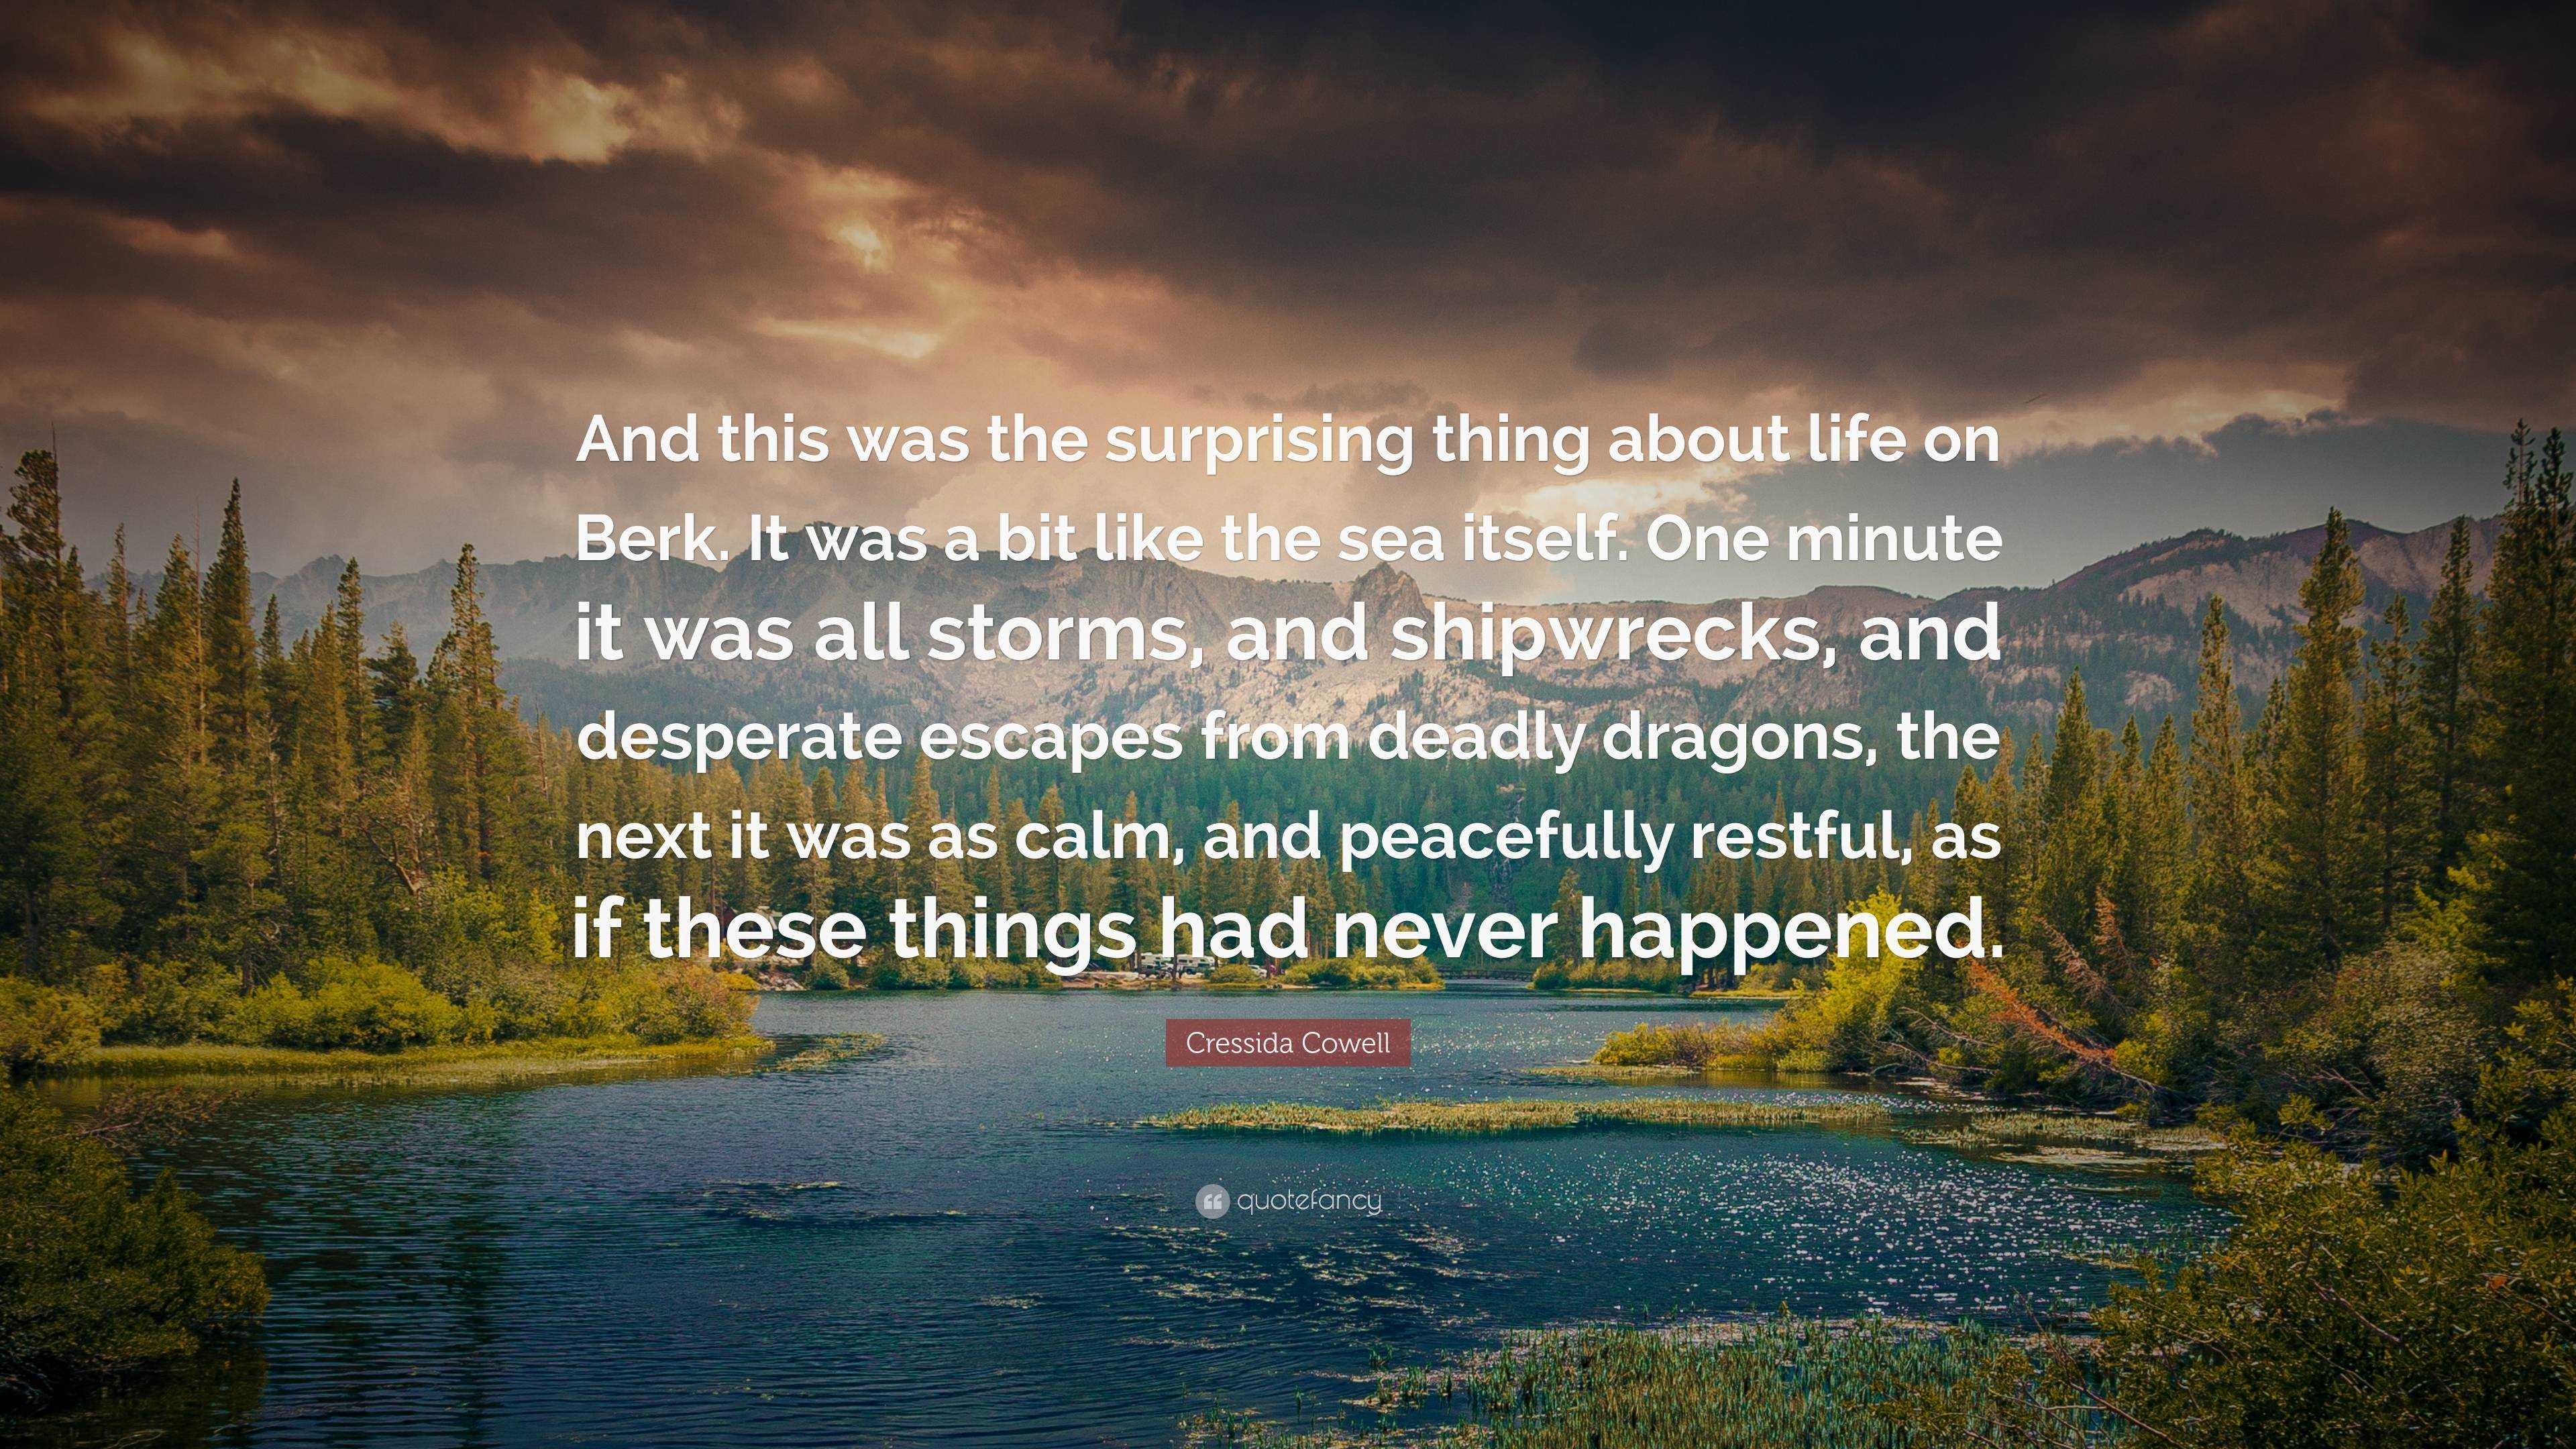 Cressida Cowell Quote: “And this was the surprising thing about life on ...